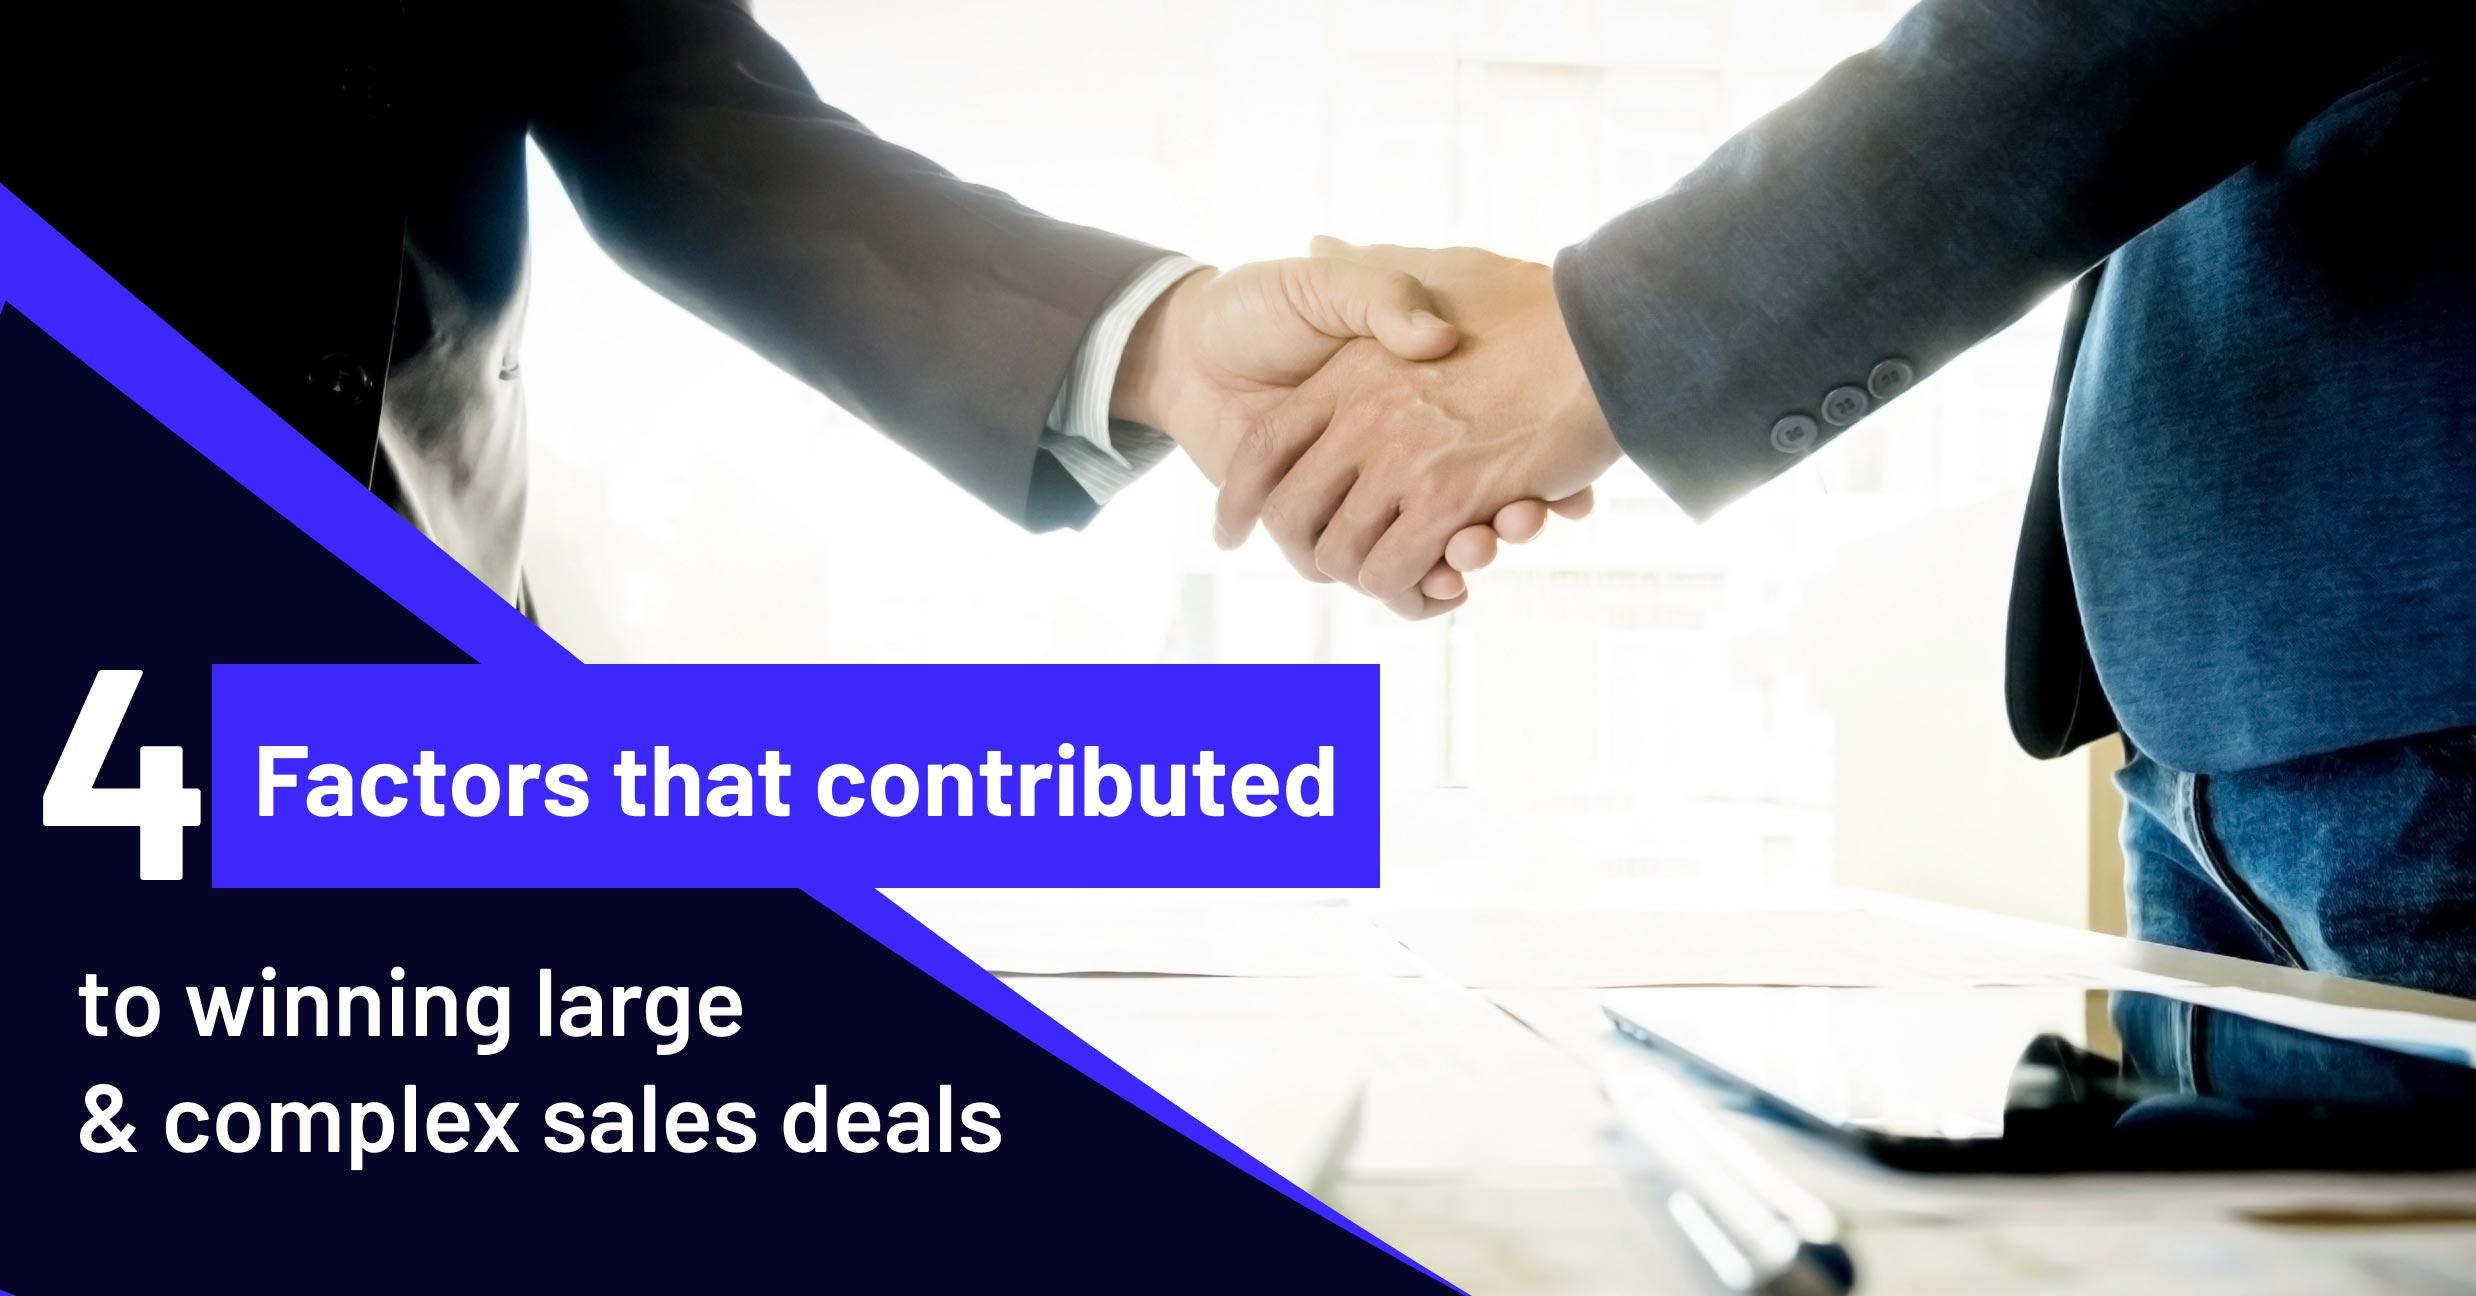 4 factors that contributed to winning large & complex sales deals